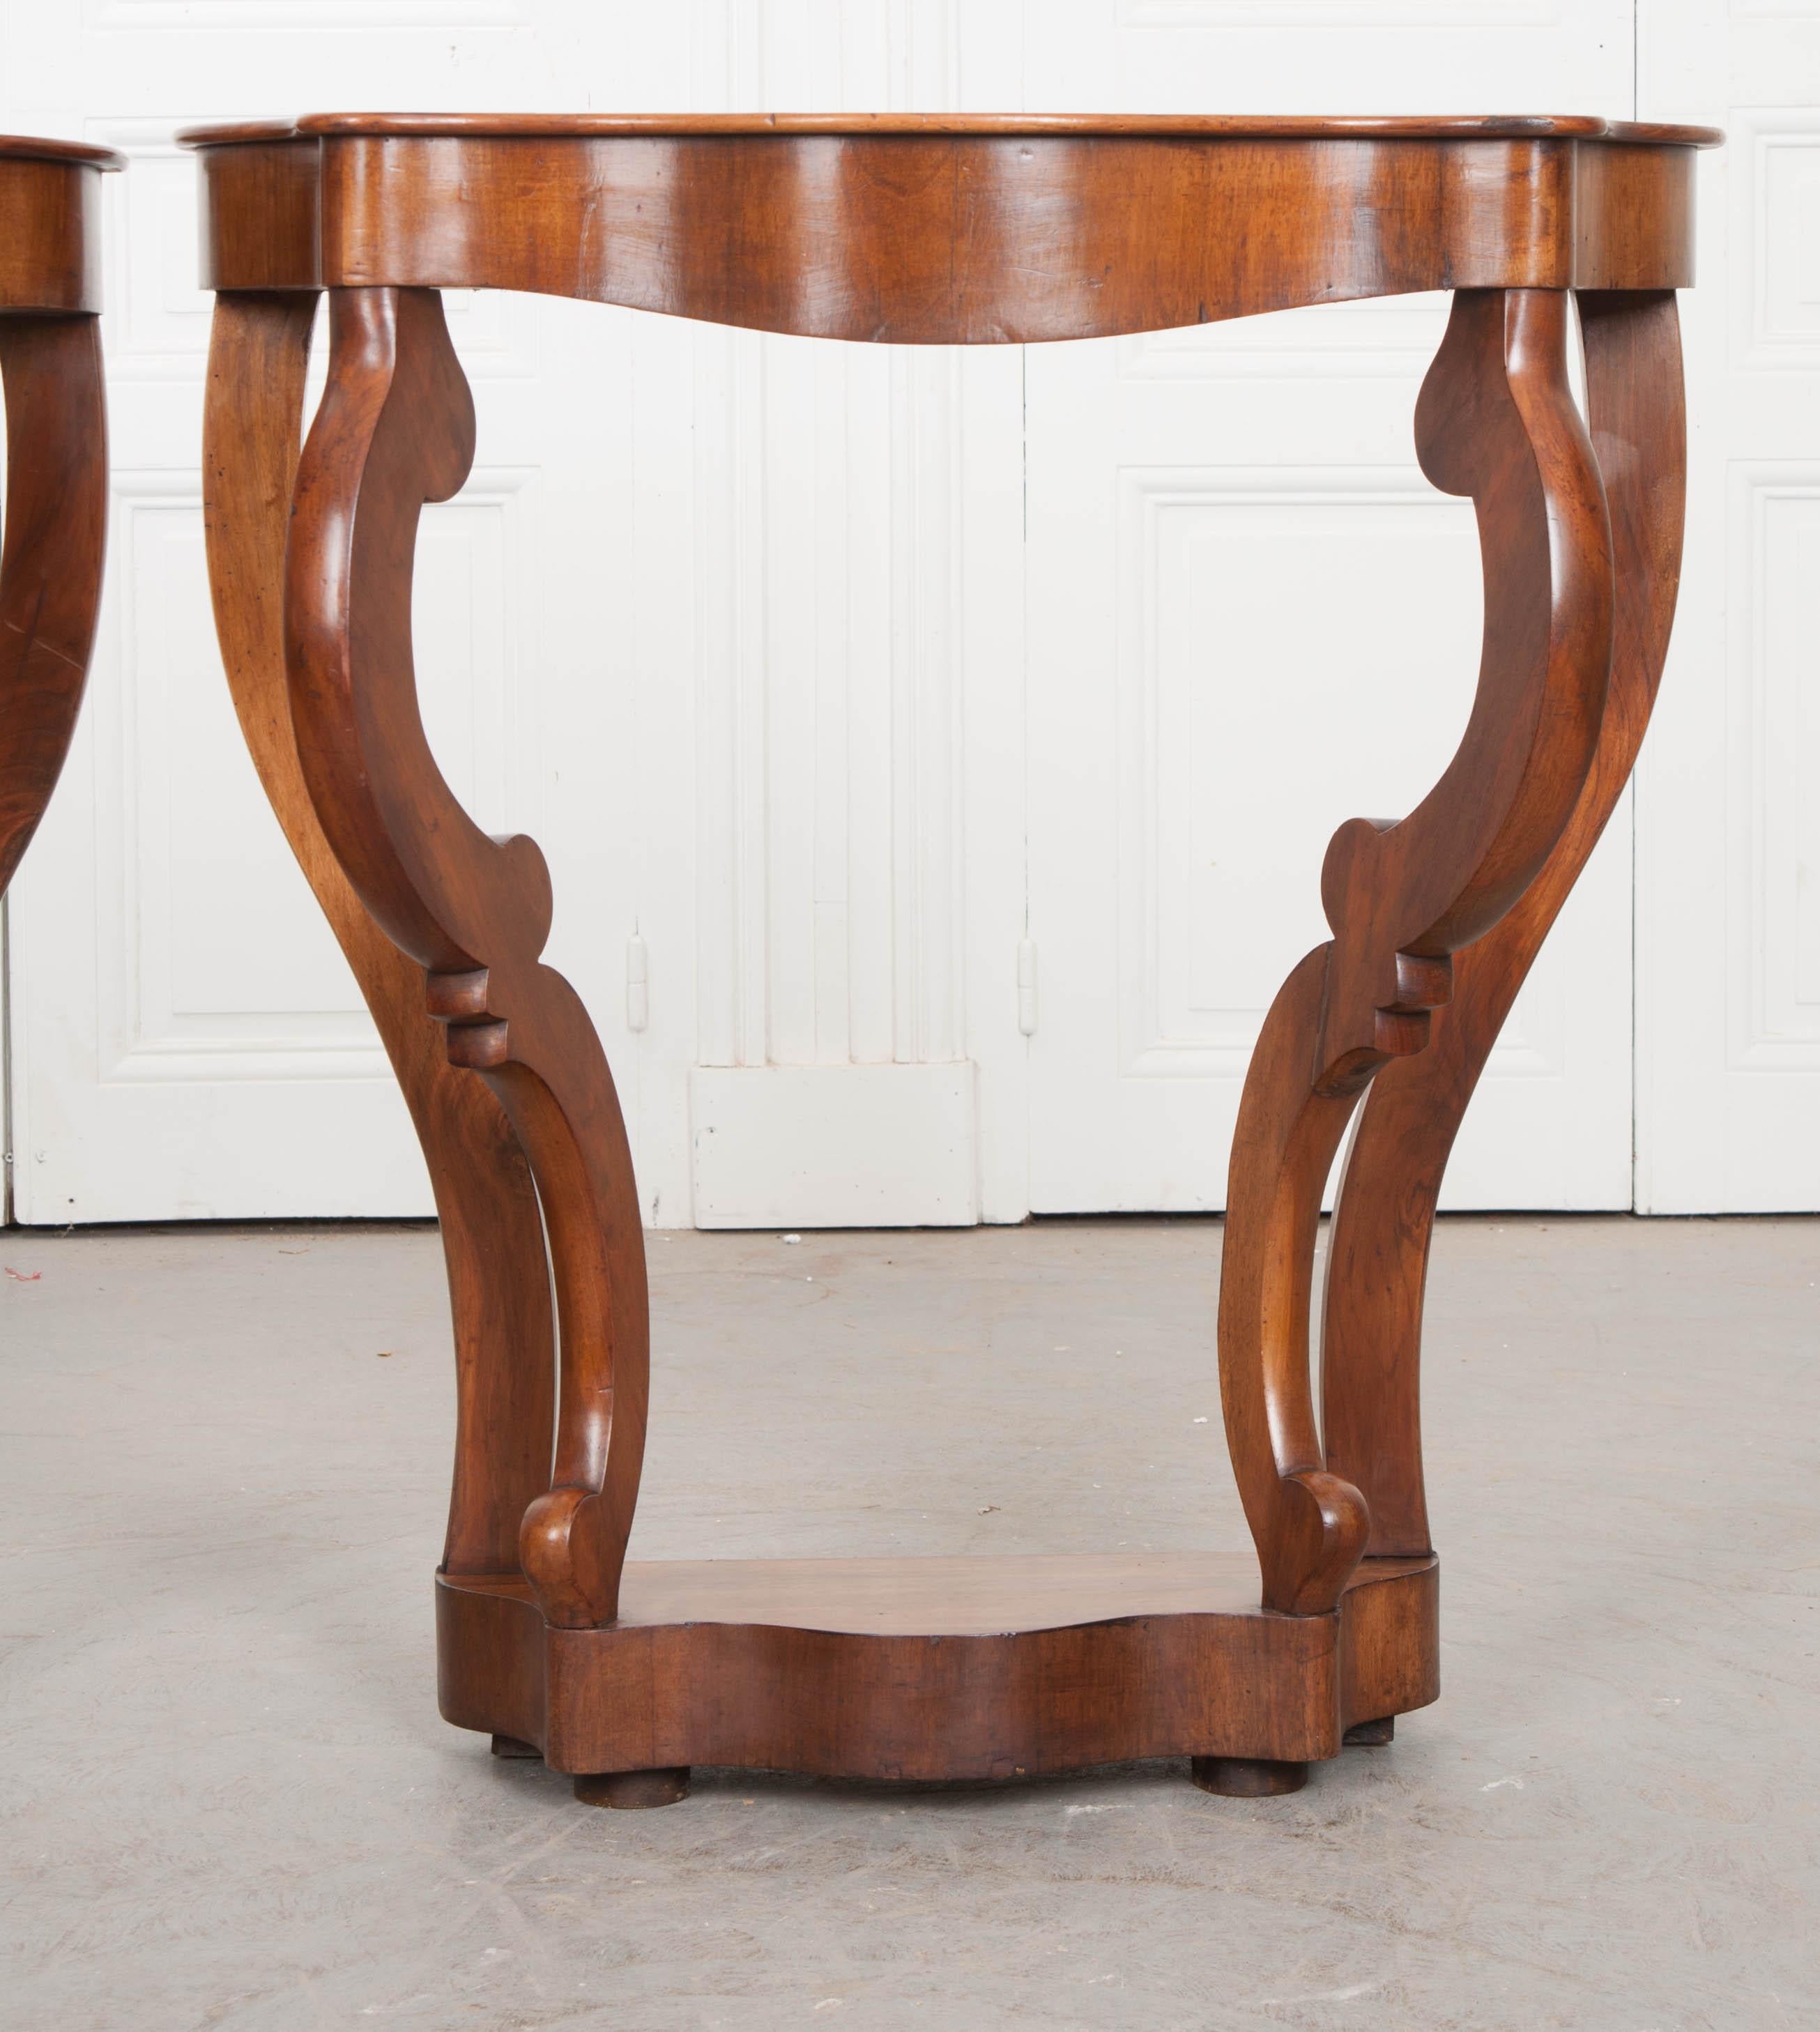 A smart pair of restauration style walnut consoles from 19th century France. They are demilune in form and have a shapely top. Similarly, the legs have a curved and styled design that is interesting and absolutely stunning. The walnut veneer has